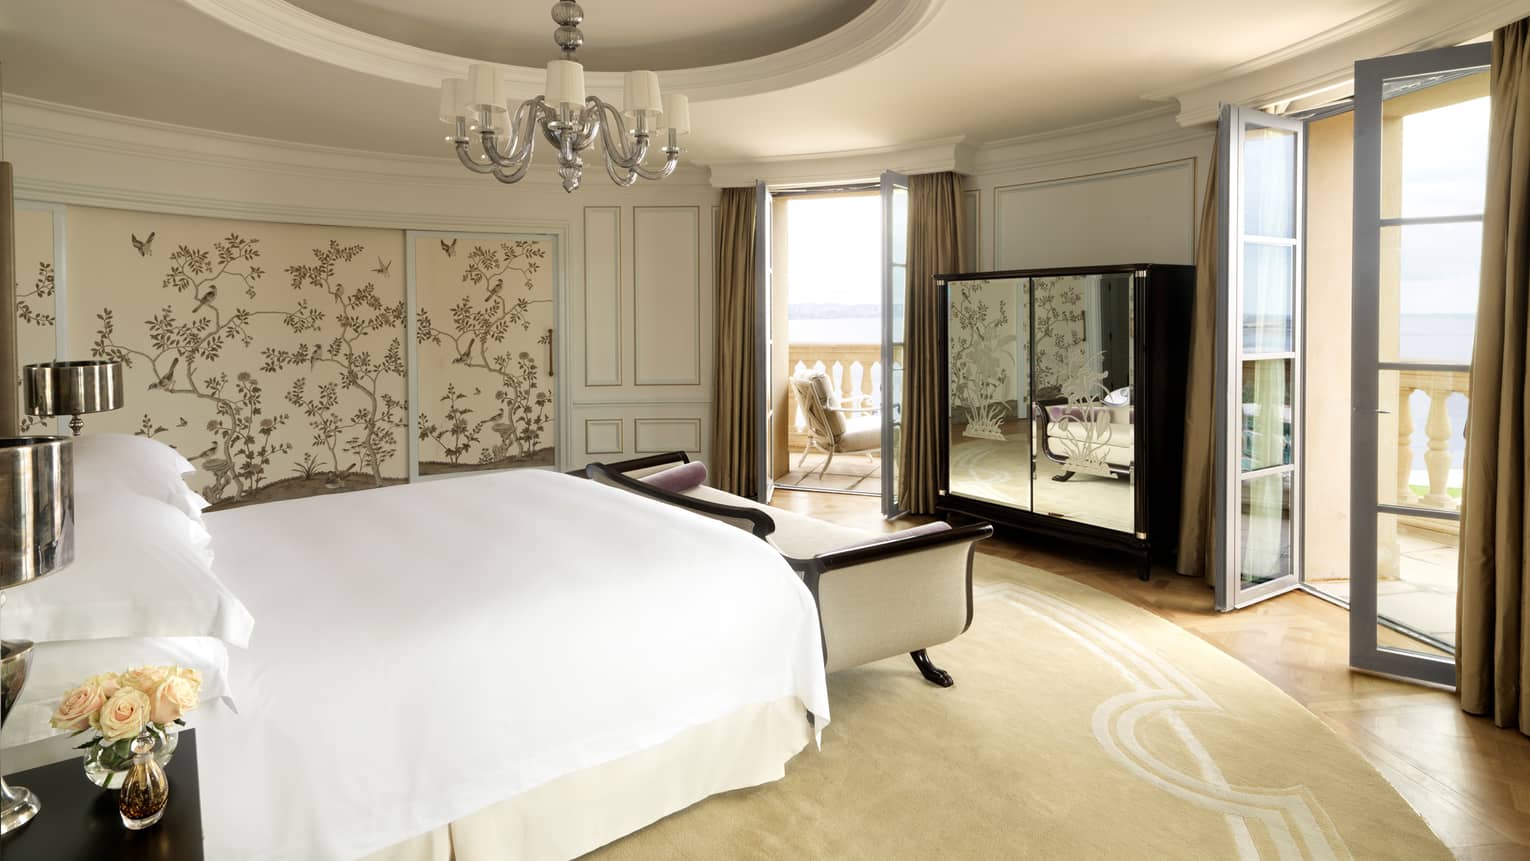 Round hotel room with recessed dome in ceiling, small chandelier, bed with white chaise, mirrored dresser, two patio doors